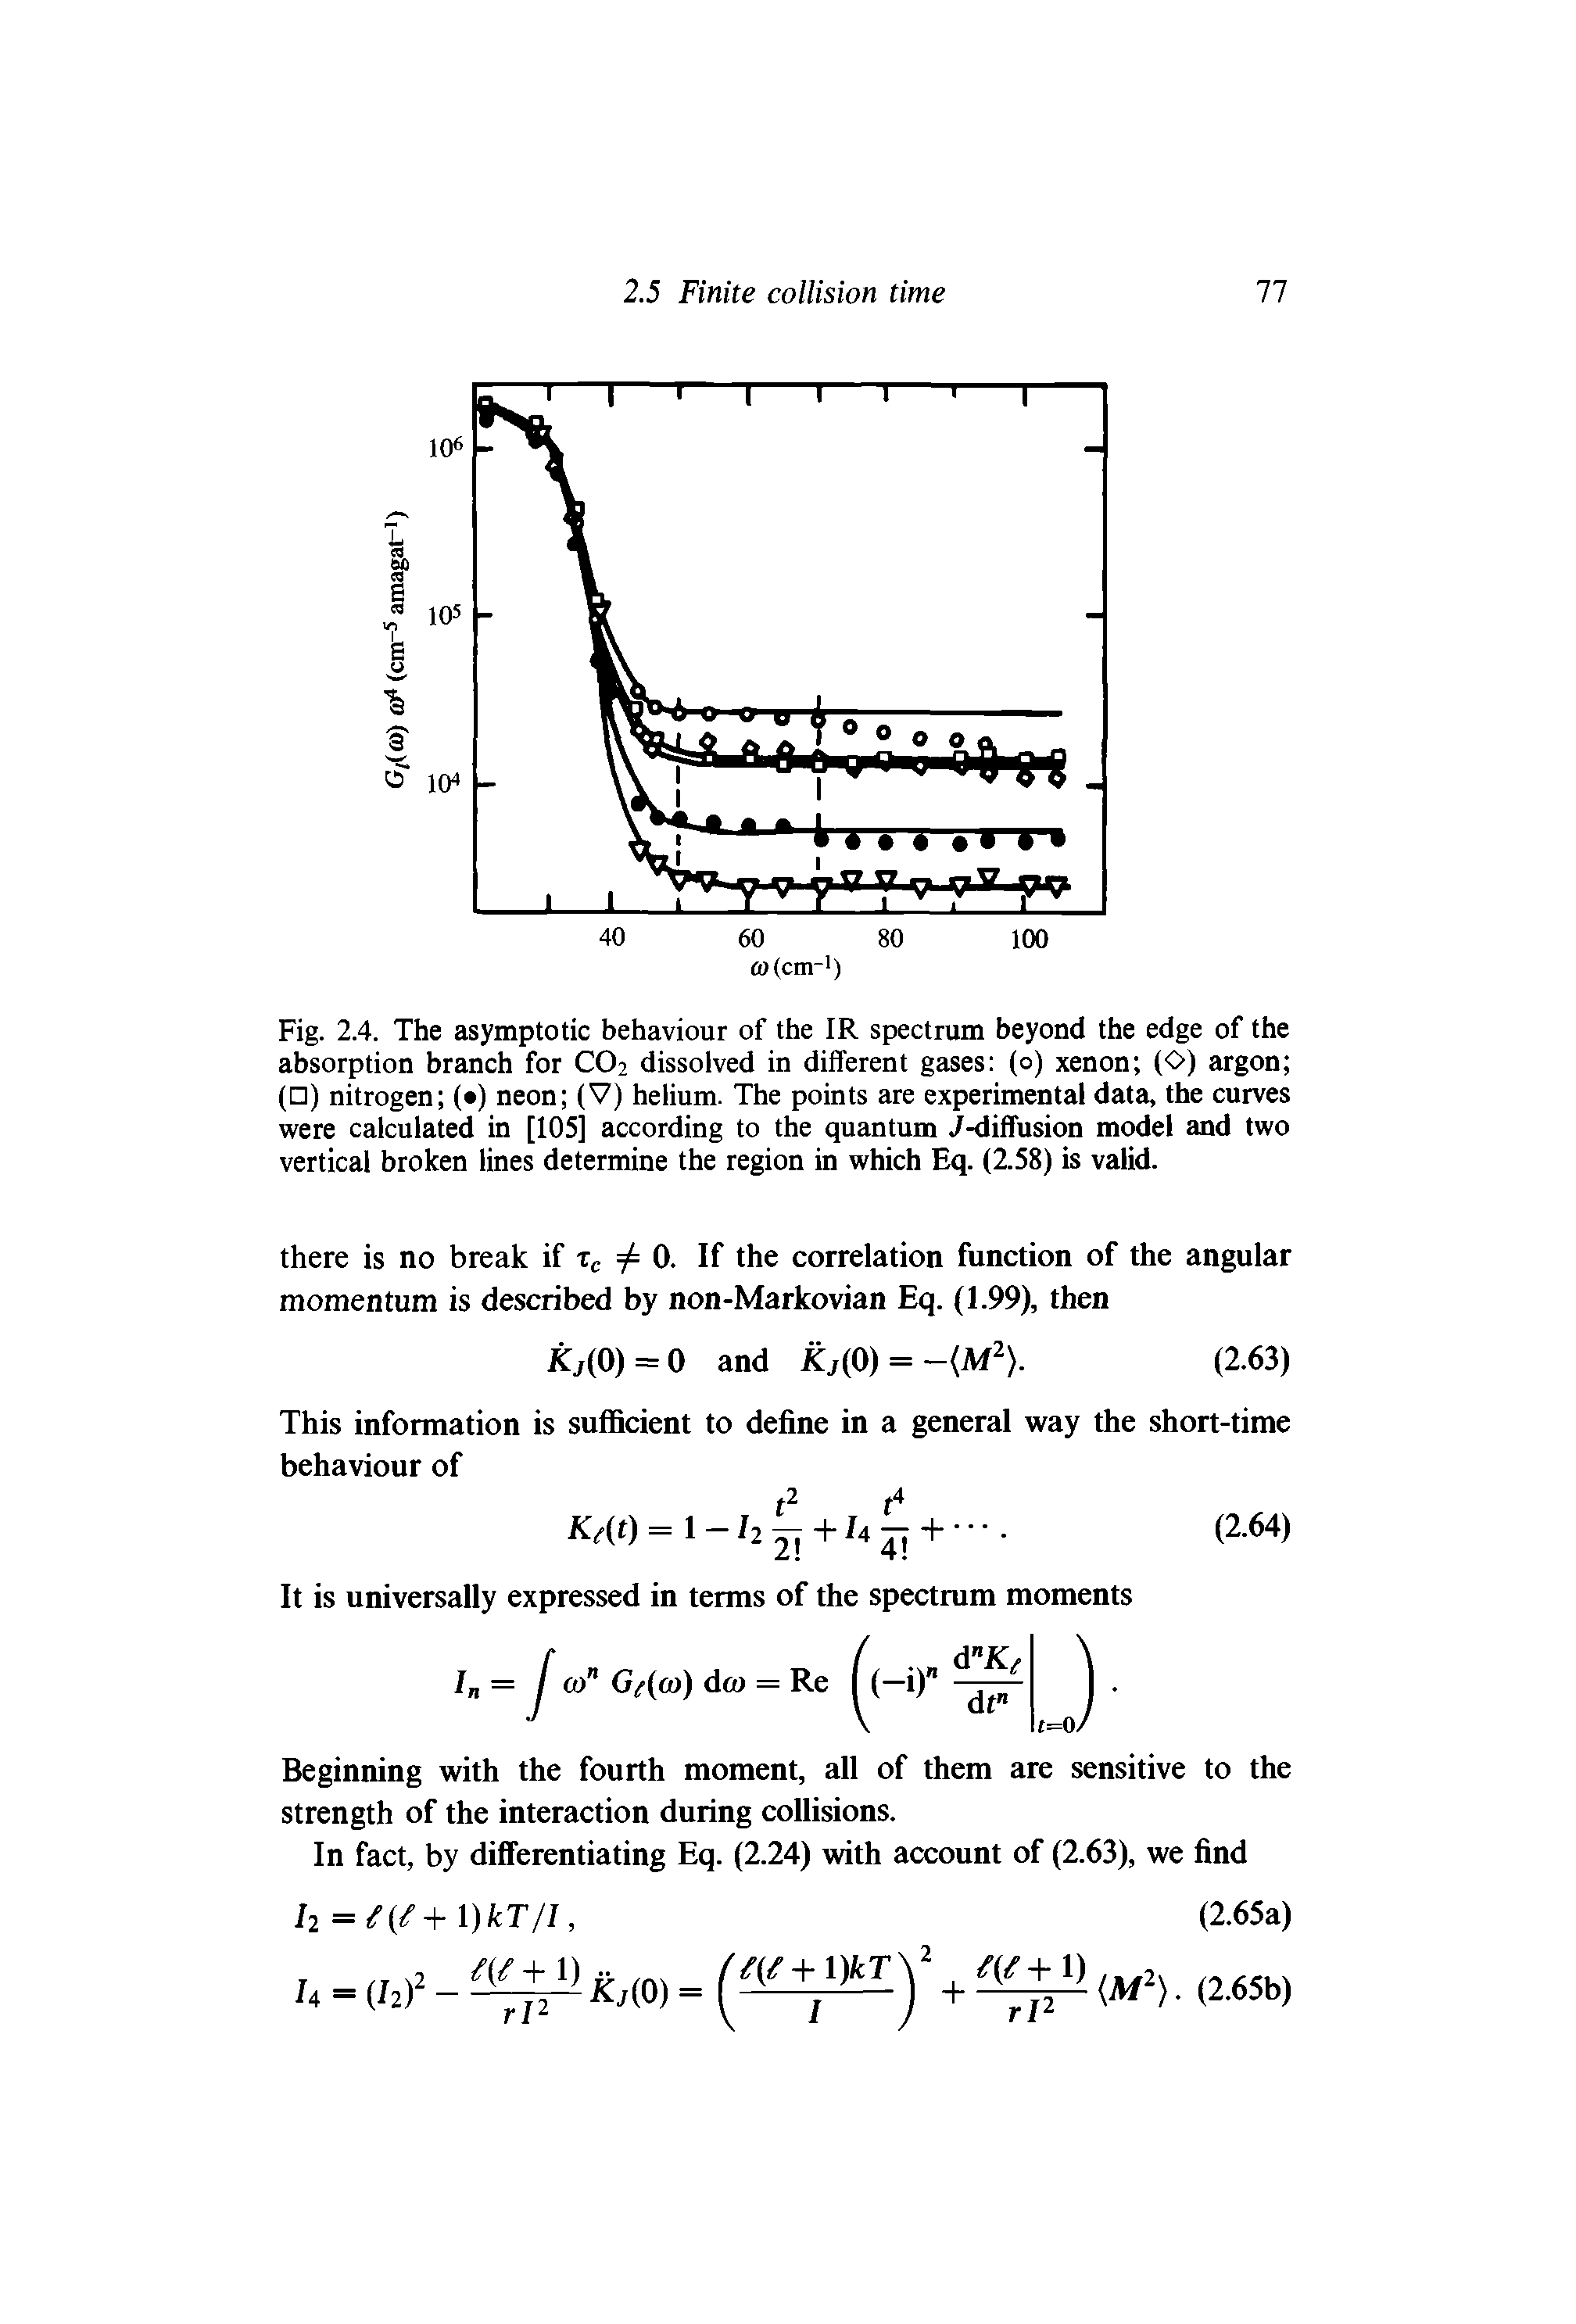 Fig. 2.4. The asymptotic behaviour of the IR spectrum beyond the edge of the absorption branch for CO2 dissolved in different gases (o) xenon (O) argon ( ) nitrogen ( ) neon (V) helium. The points are experimental data, the curves were calculated in [105] according to the quantum J-diffusion model and two vertical broken lines determine the region in which Eq. (2.58) is valid.